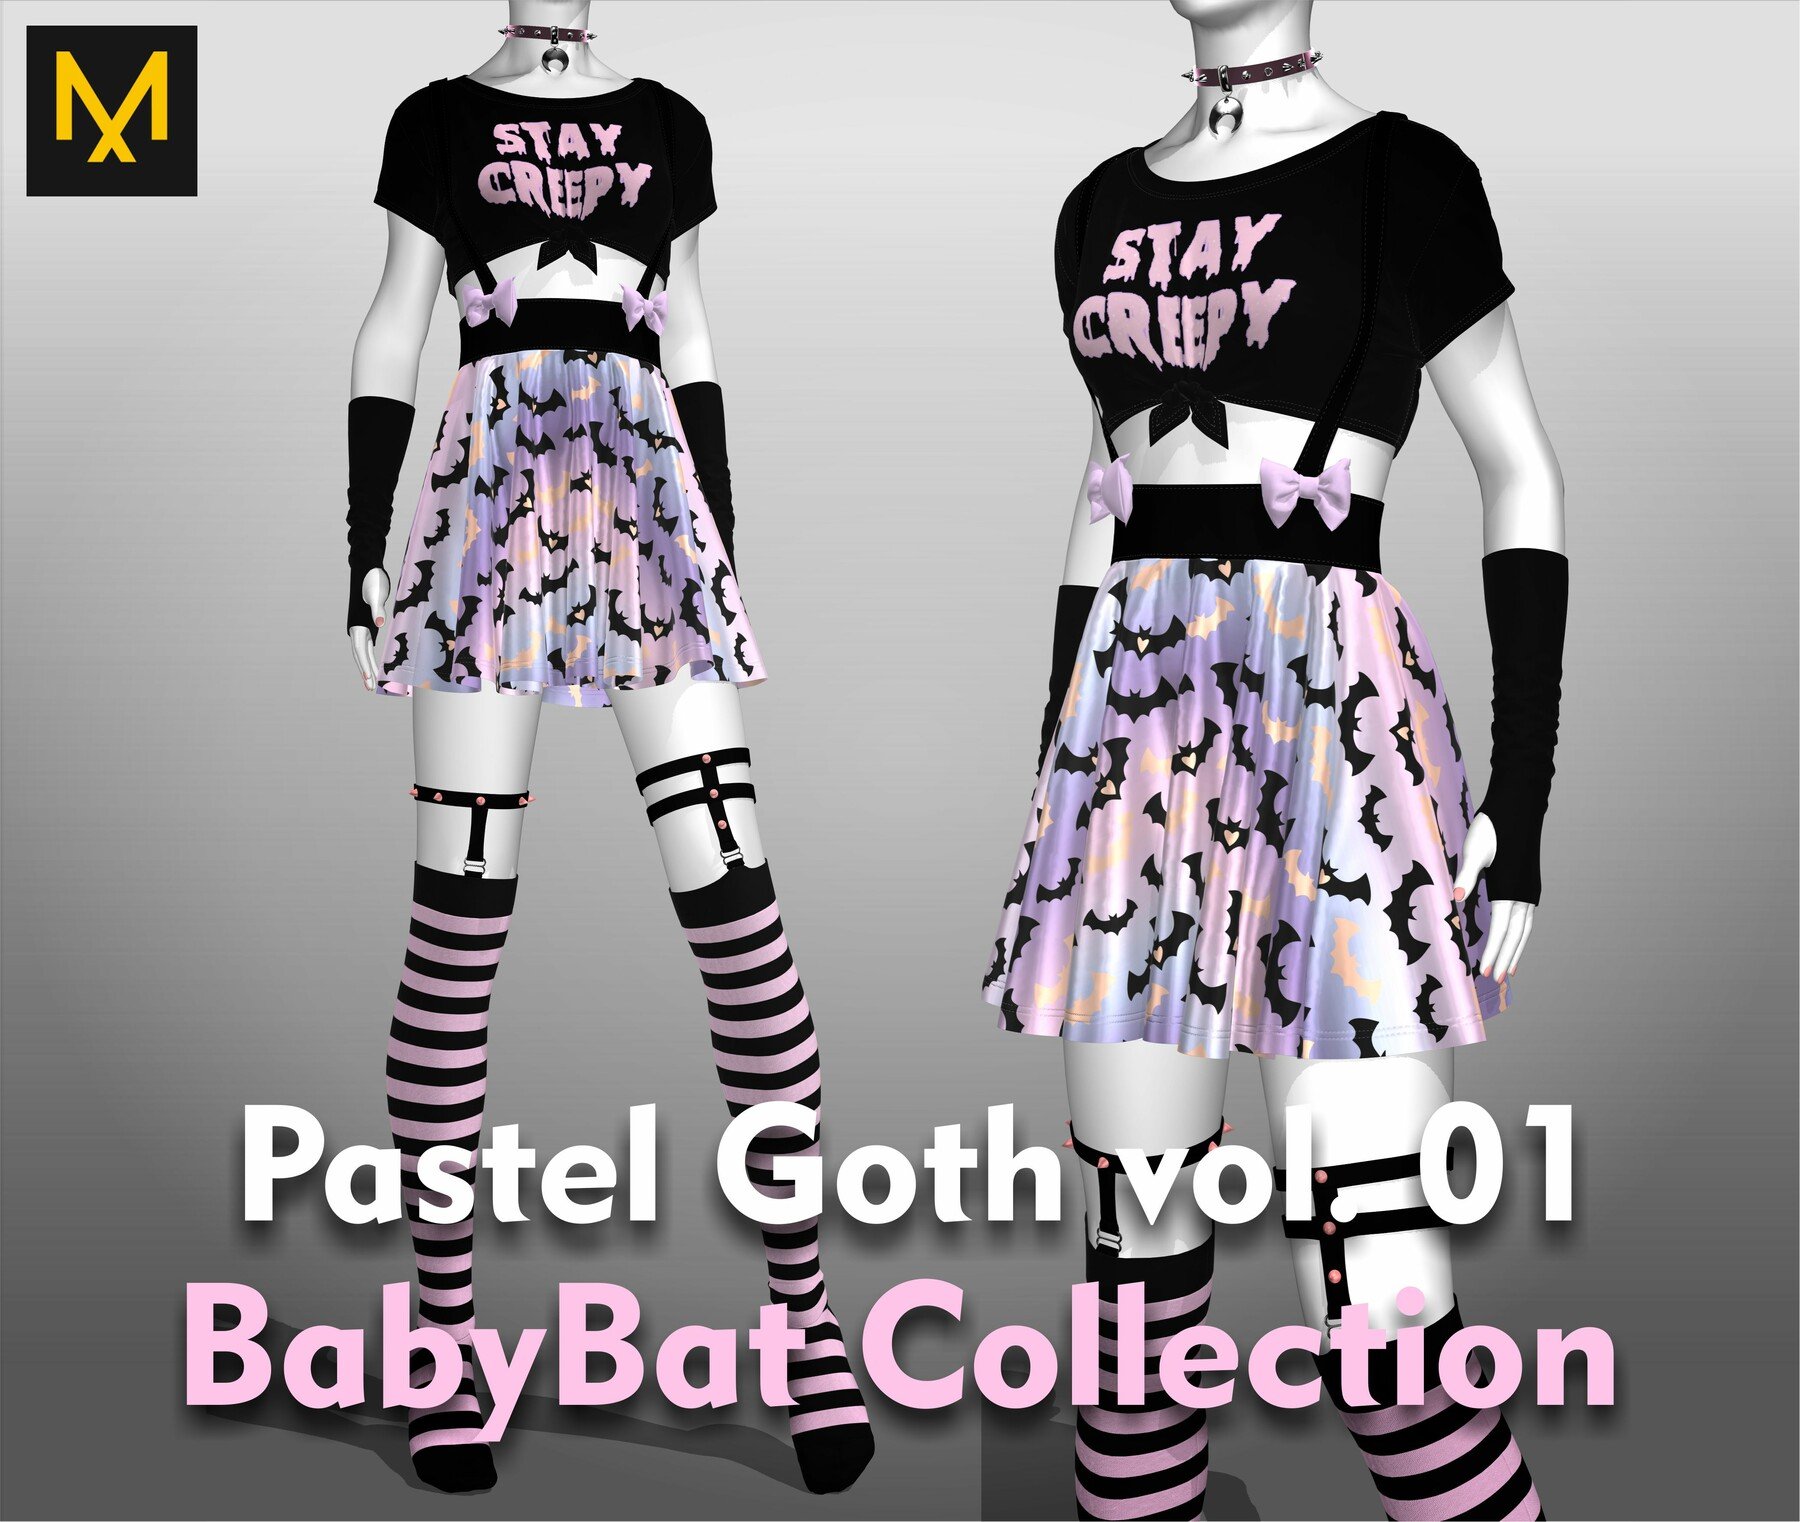 ArtStation - Pastel Goth Outfit  - BabyBat Collection | Resources